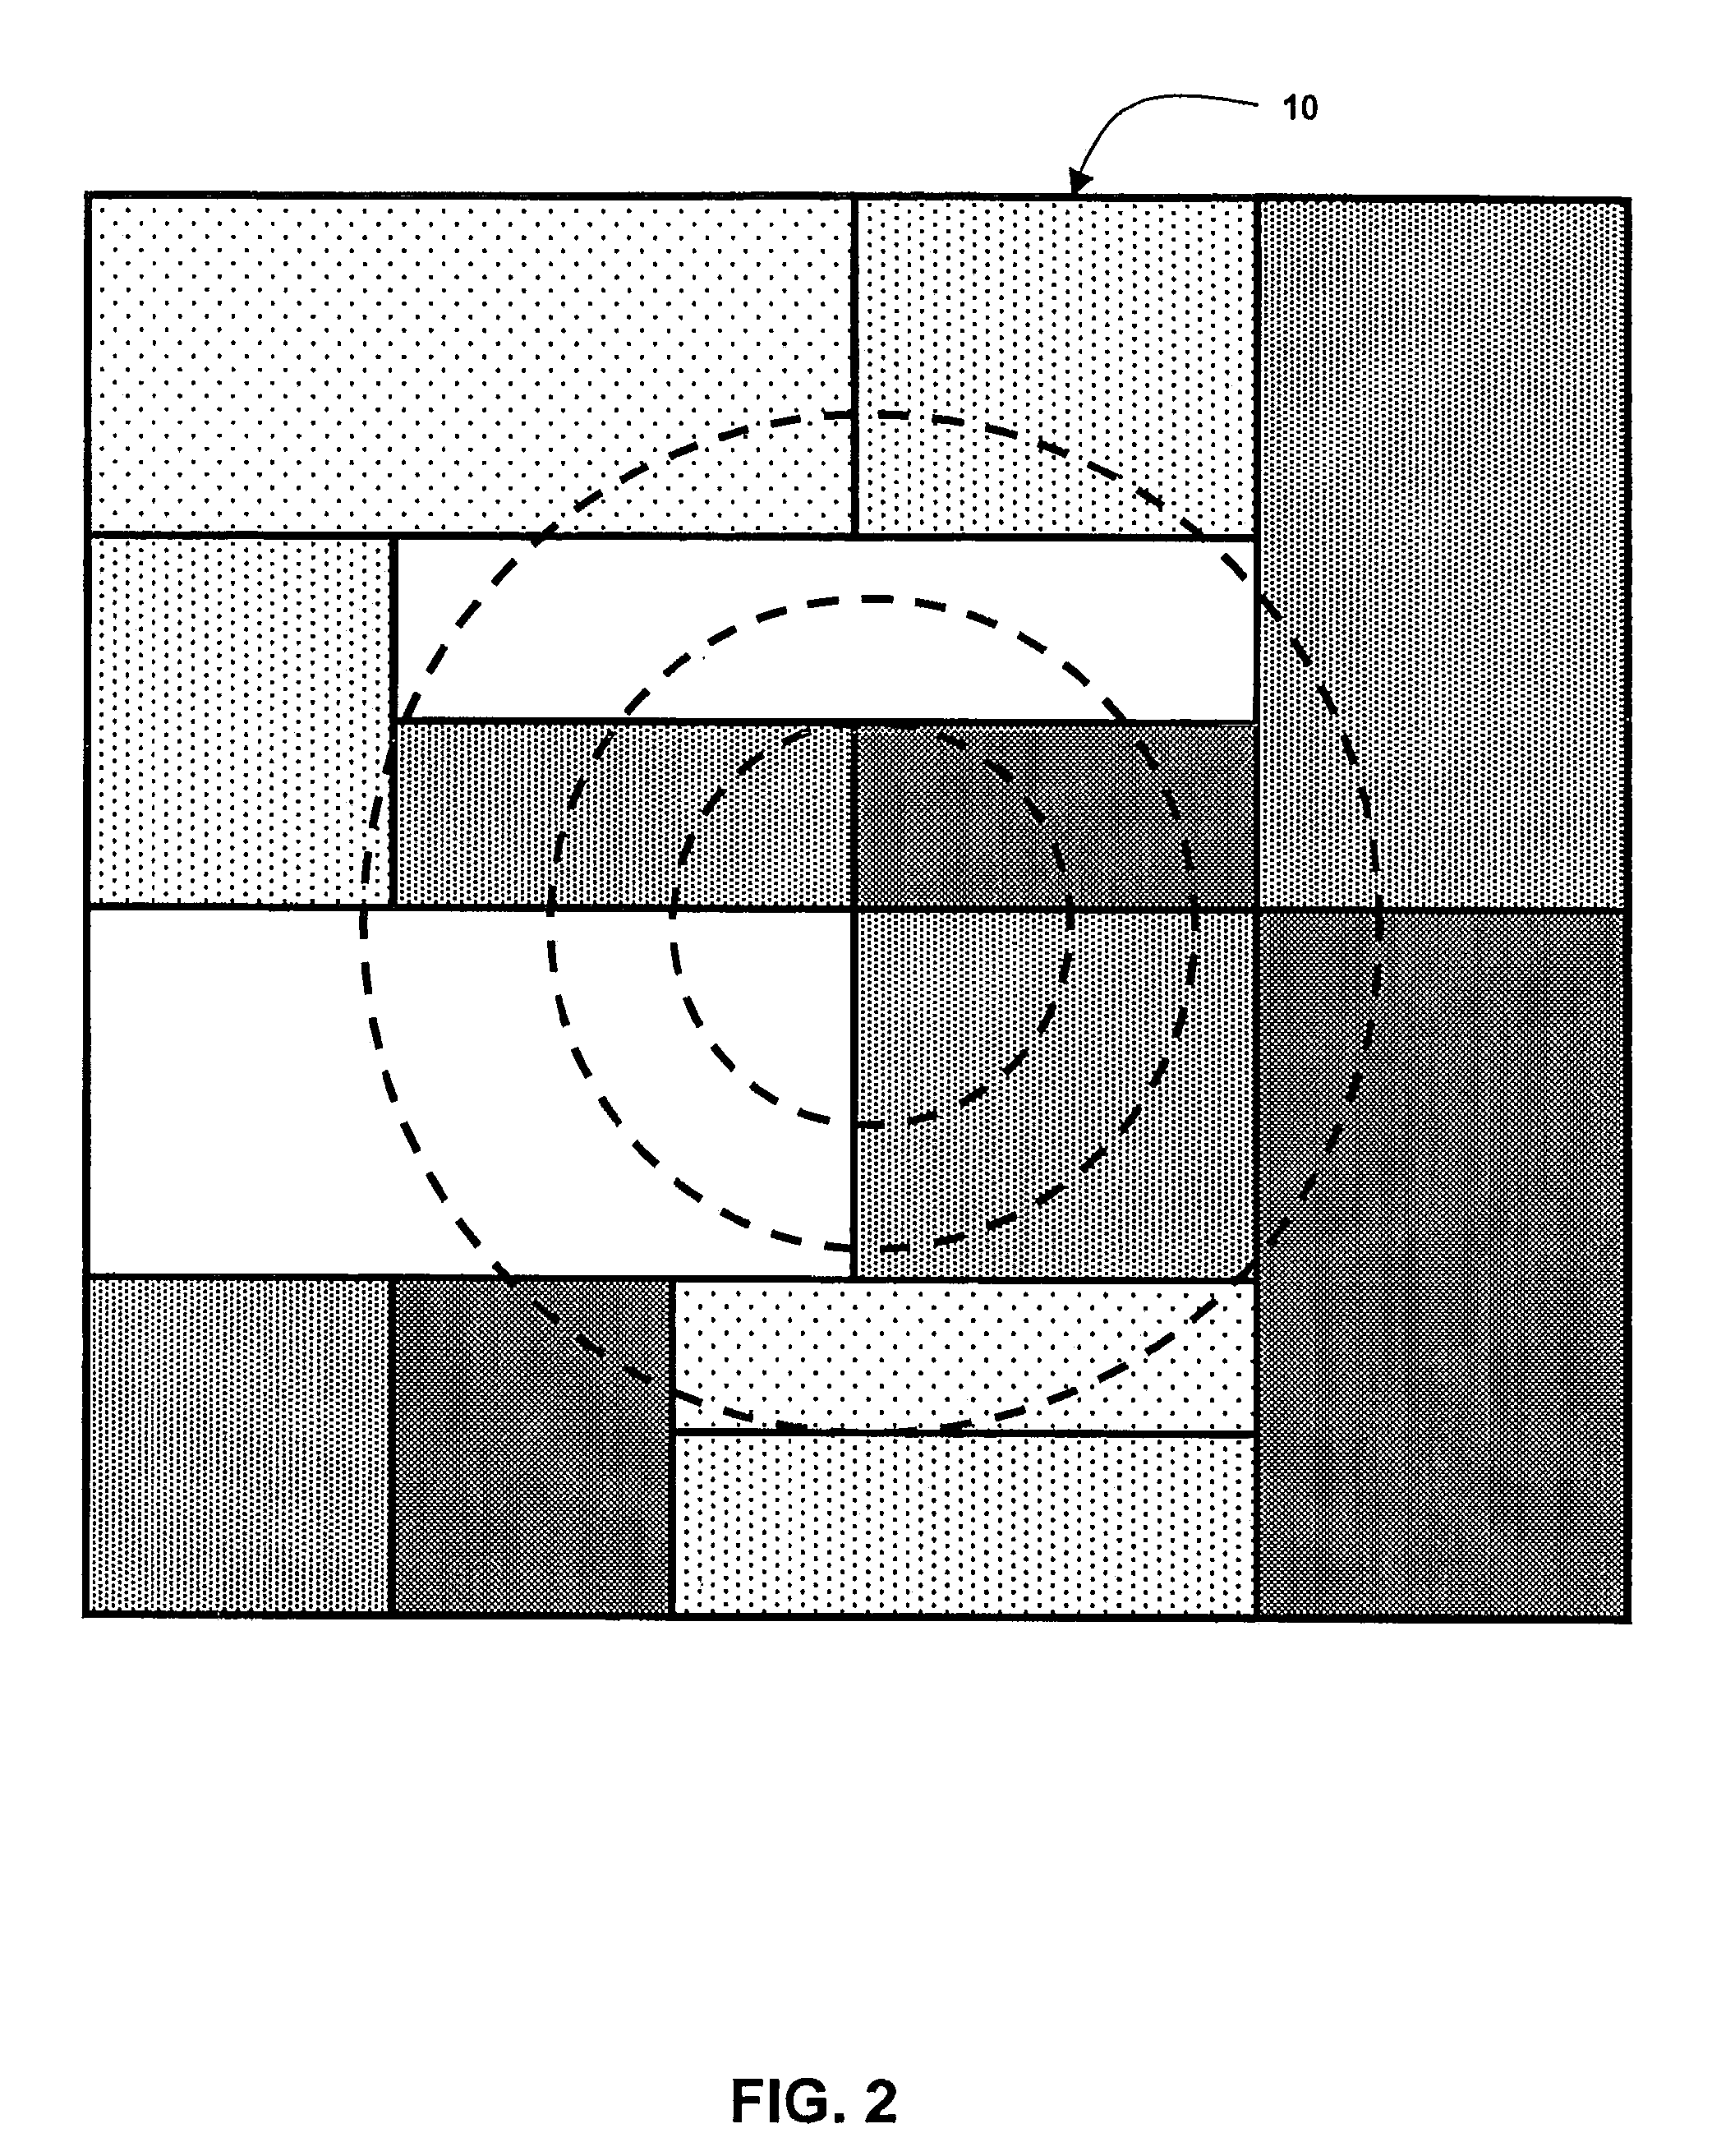 Mobile automatic meter reading system and method